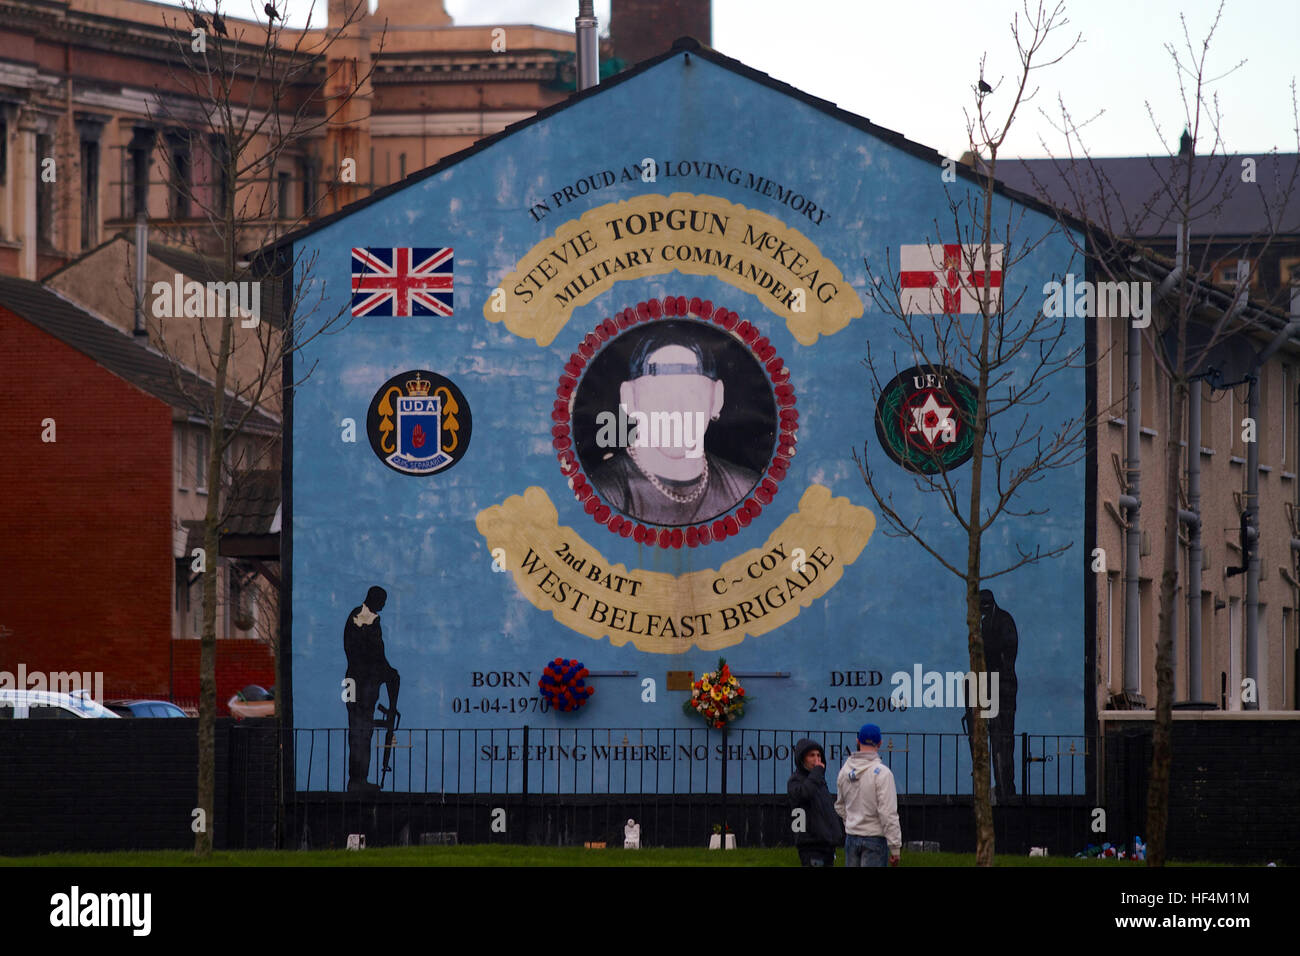 The honor tour of Ira soldiers -  17/08/2009  -  Northern Ireland / Ulster / Belfast  -  In the unionist area of South Belfast, a mural honoring a unionist brigade    -  Olivier Goujon / Le Pictorium Stock Photo